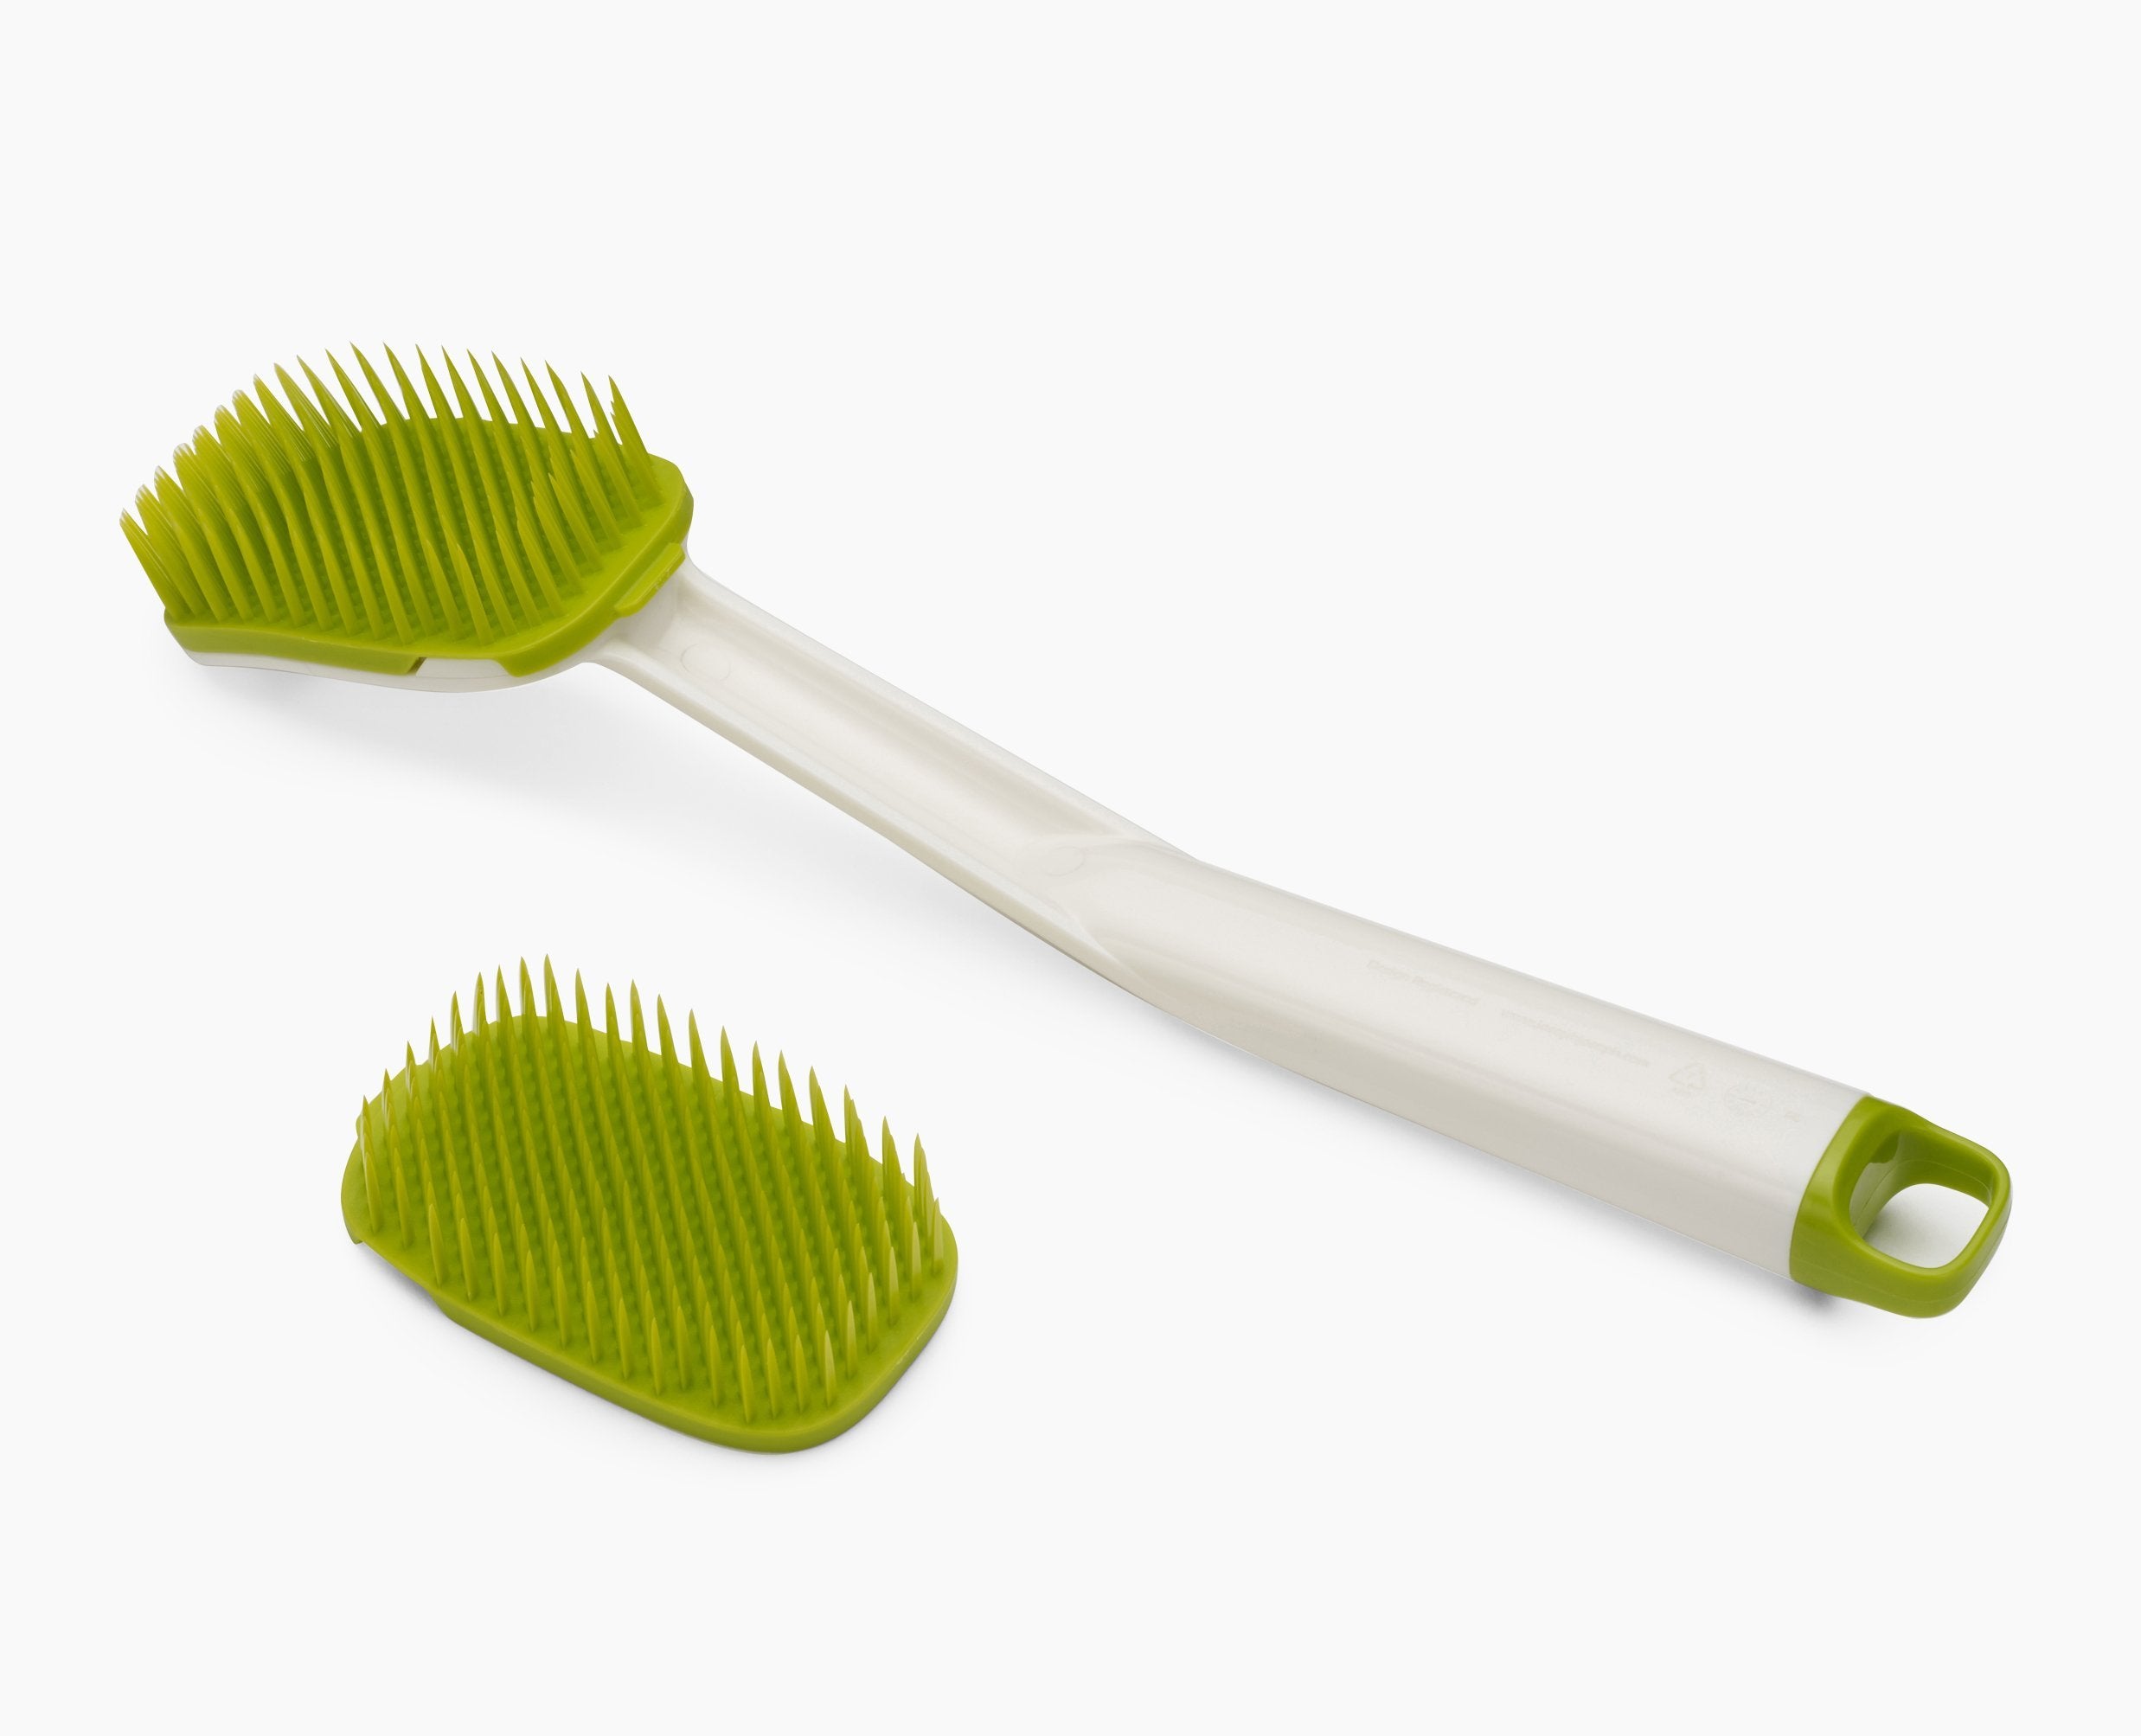 BEON.COM.AU  The innovative brush and scrubber in this 2-piece set feature advanced polymer bristles that dry quickly and are durable and flexible for effective cleaning.  Quick drying Scrubber features fine bristles on one side for gentle cleaning tasks and coarse bristles on the other for tougher deposits ... Joseph Joseph at BEON.COM.AU